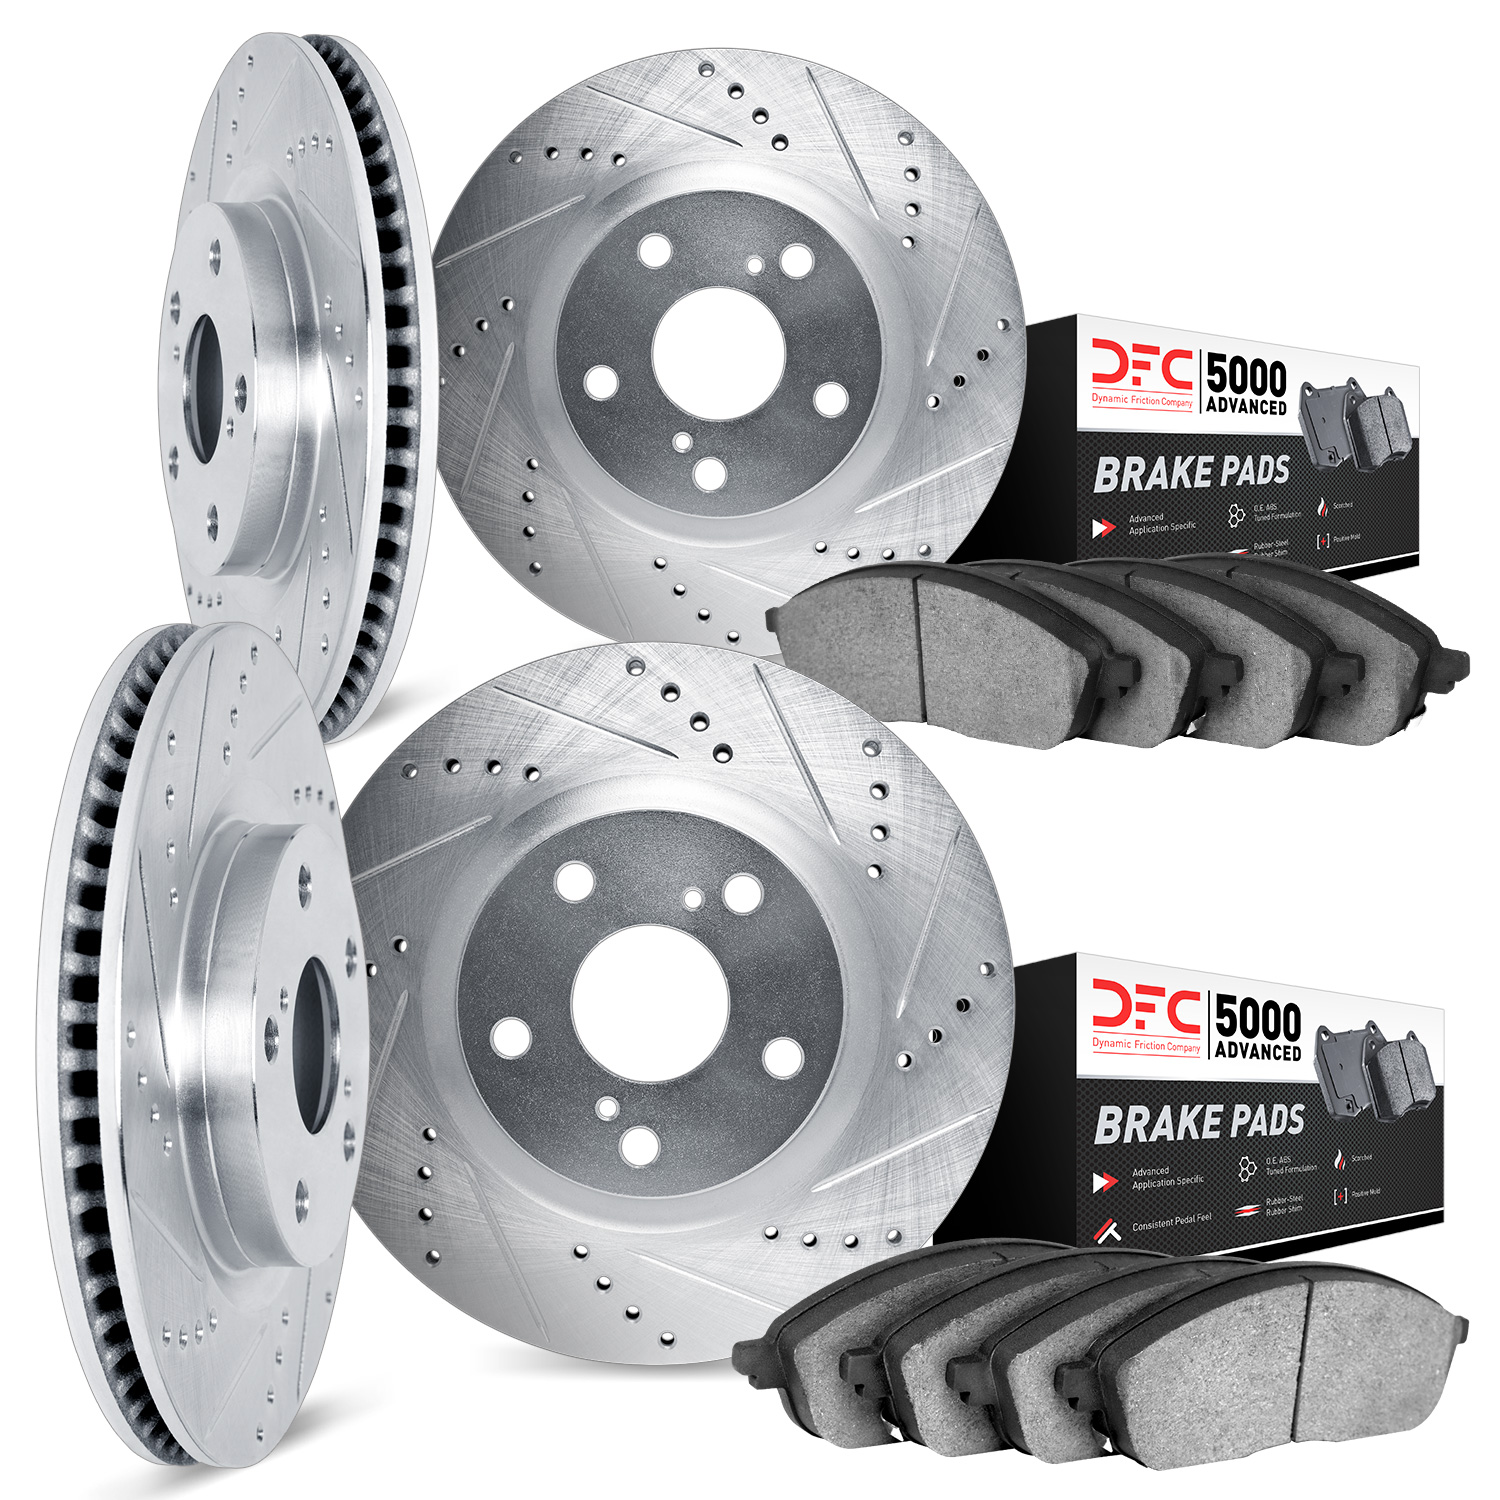 7504-56030 Drilled/Slotted Brake Rotors w/5000 Advanced Brake Pads Kit [Silver], 2003-2011 Ford/Lincoln/Mercury/Mazda, Position: